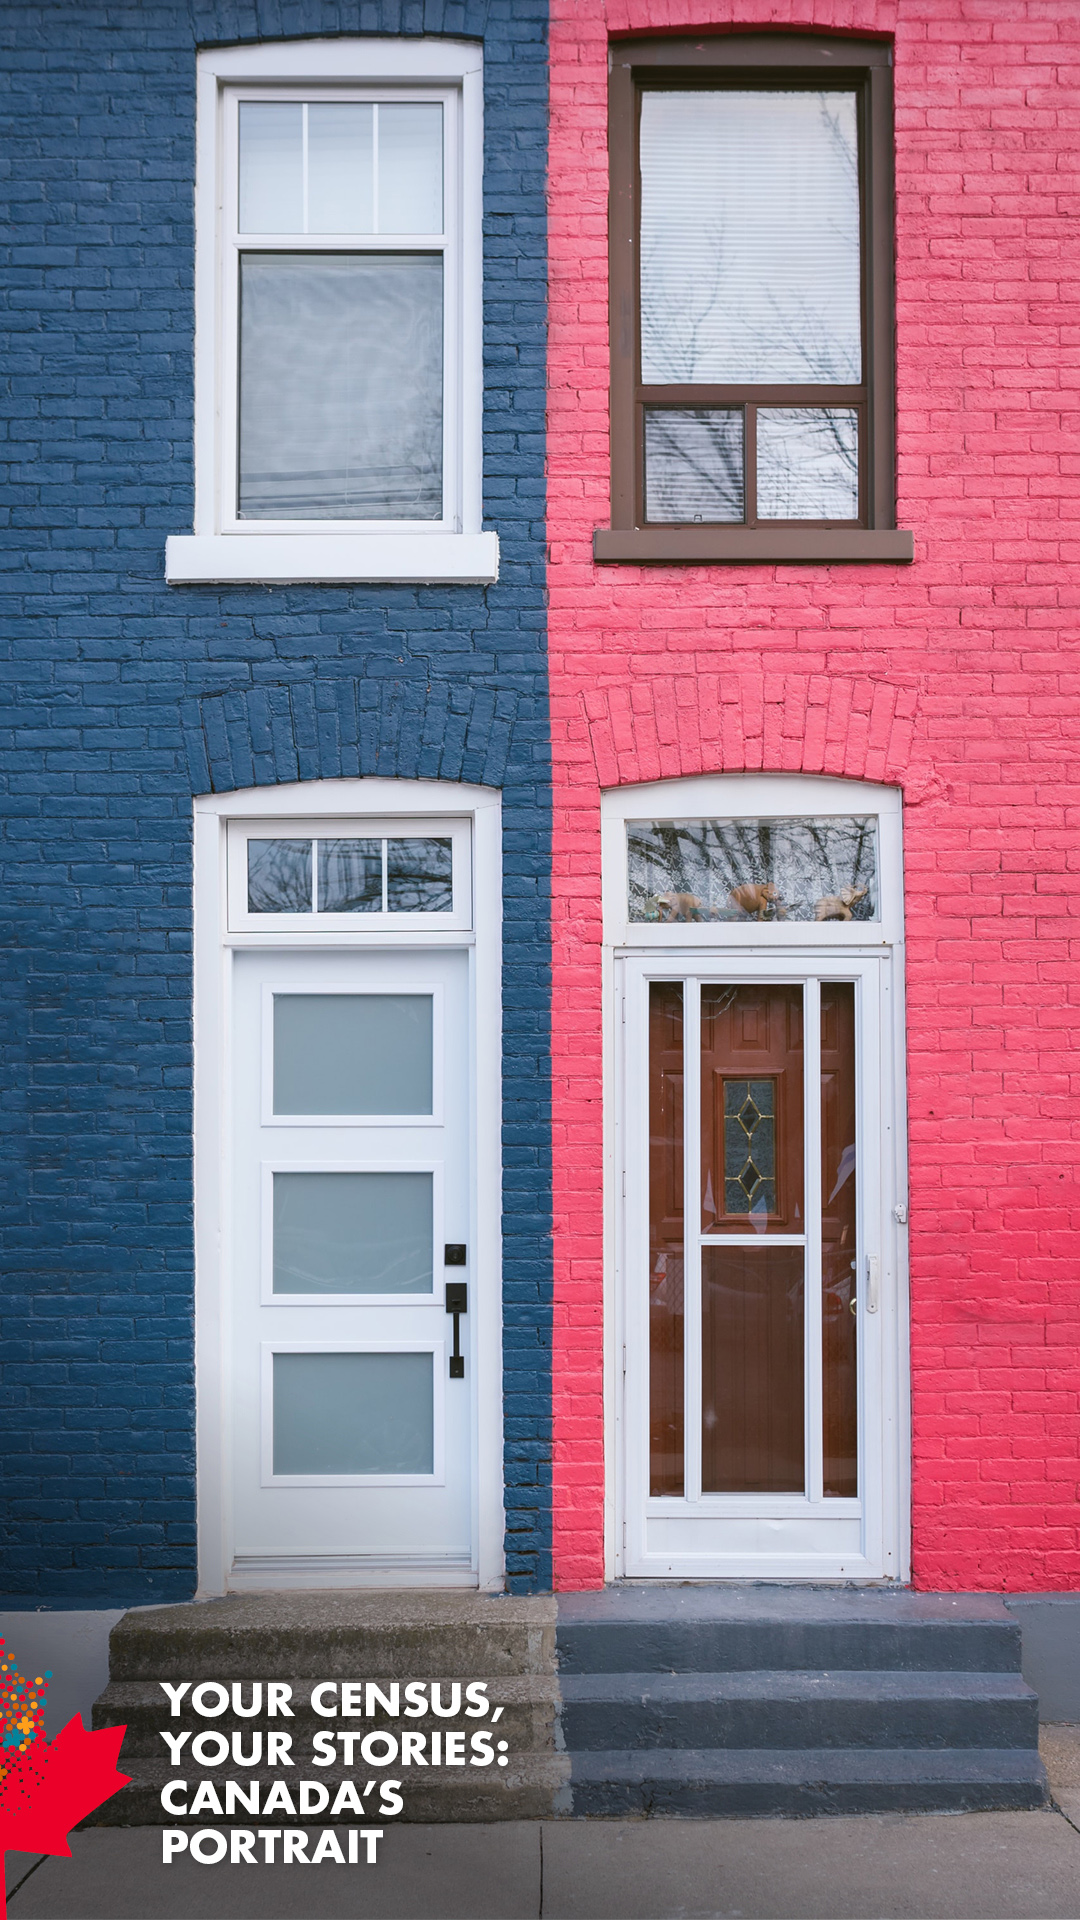 Your census, your stories; Canada's portrait - Two brick row houses painted pink and blue